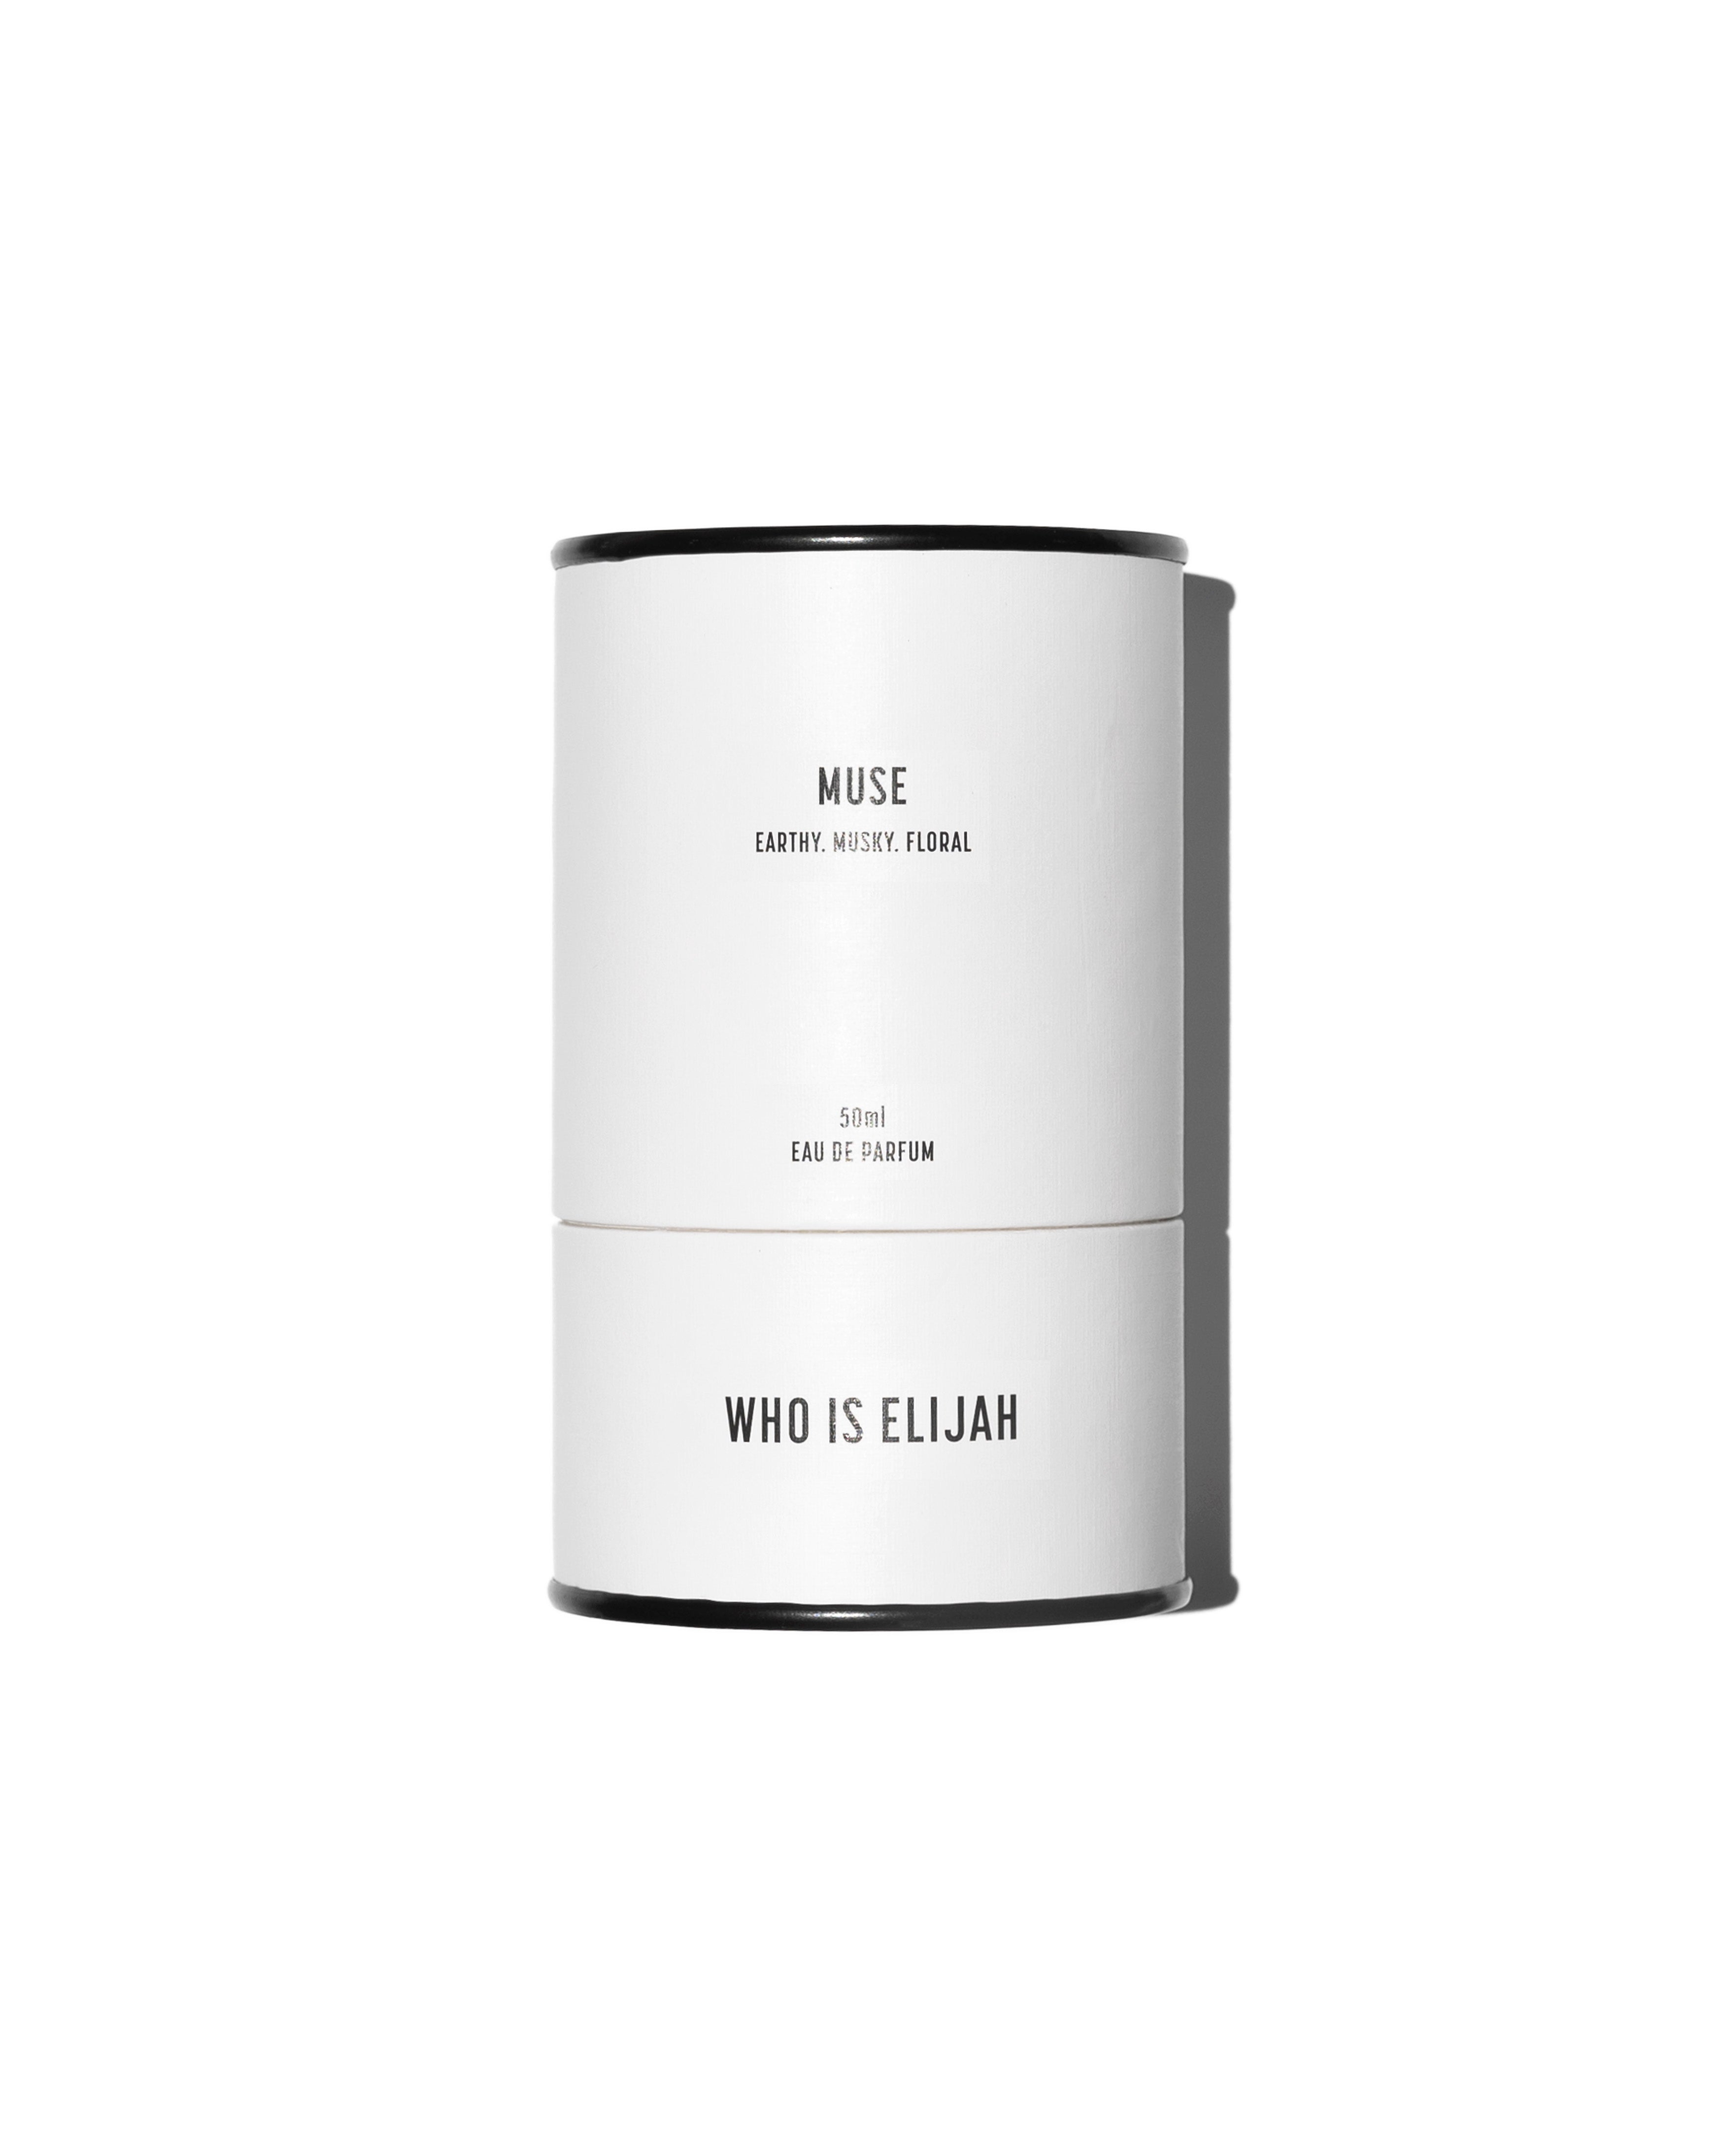 WHO IS ELIJAH | MUSE - 50ML